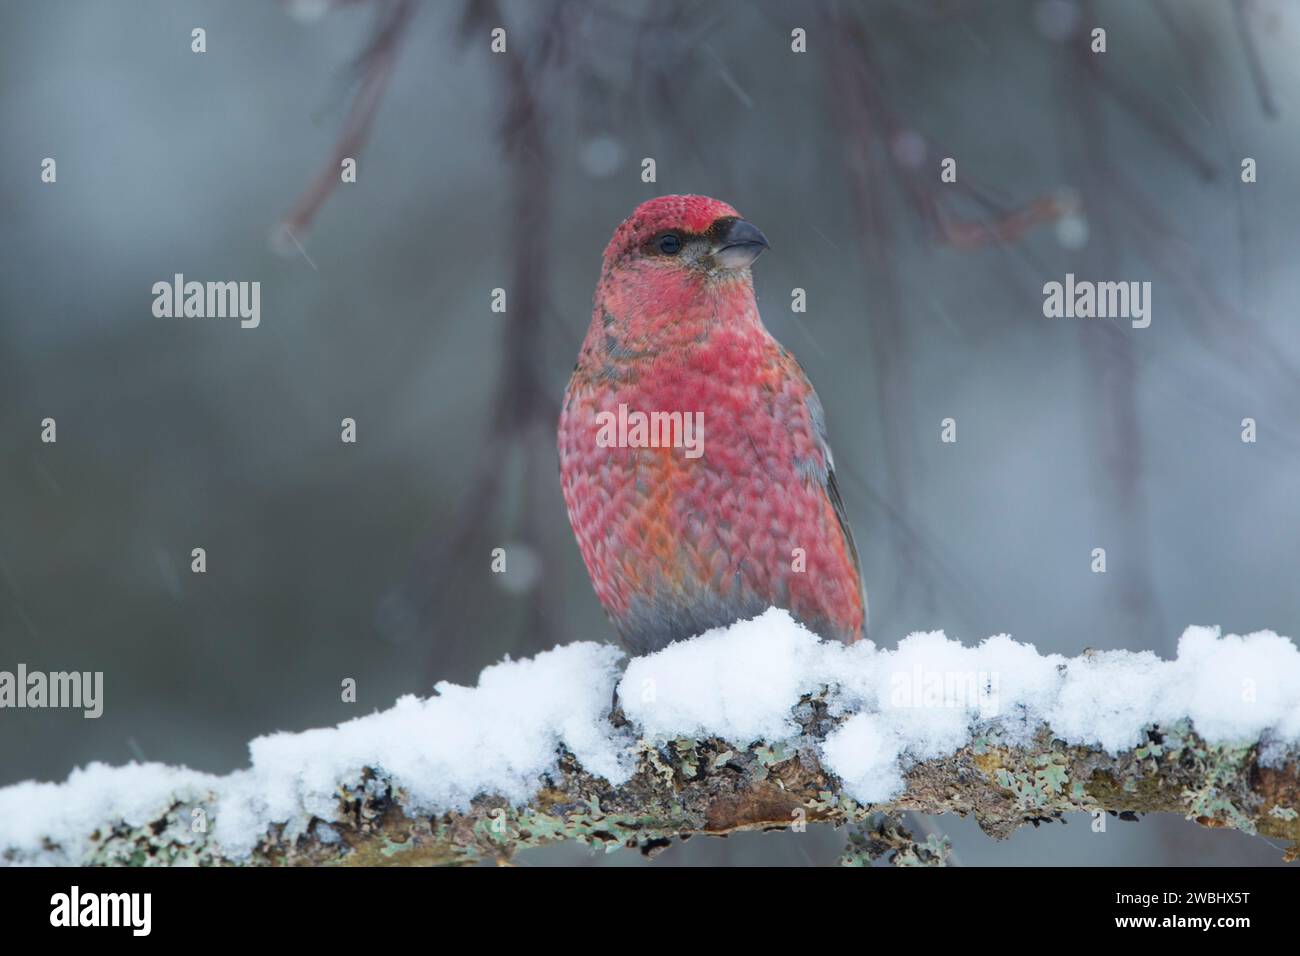 Male pine grosbeak (Pinicola enucleator) perched on a snow covered branch showing details of front plumage in soft light while snow is falling.  Borea Stock Photo